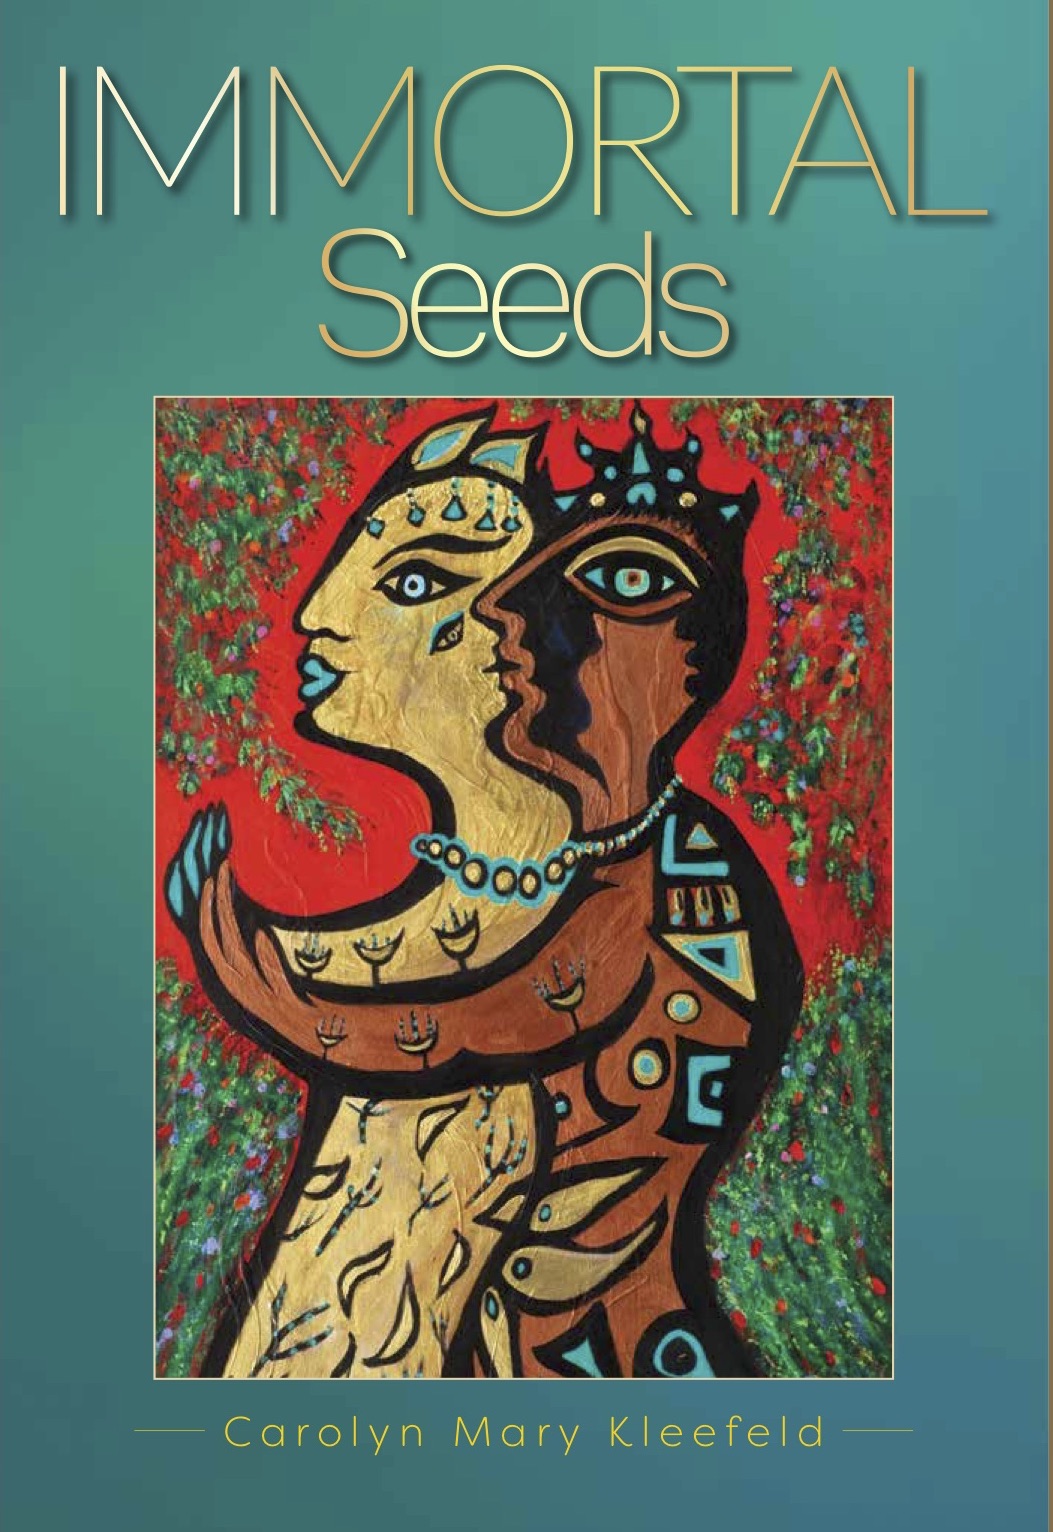 Immortal Seeds by Carolyn Mary Kleefeld